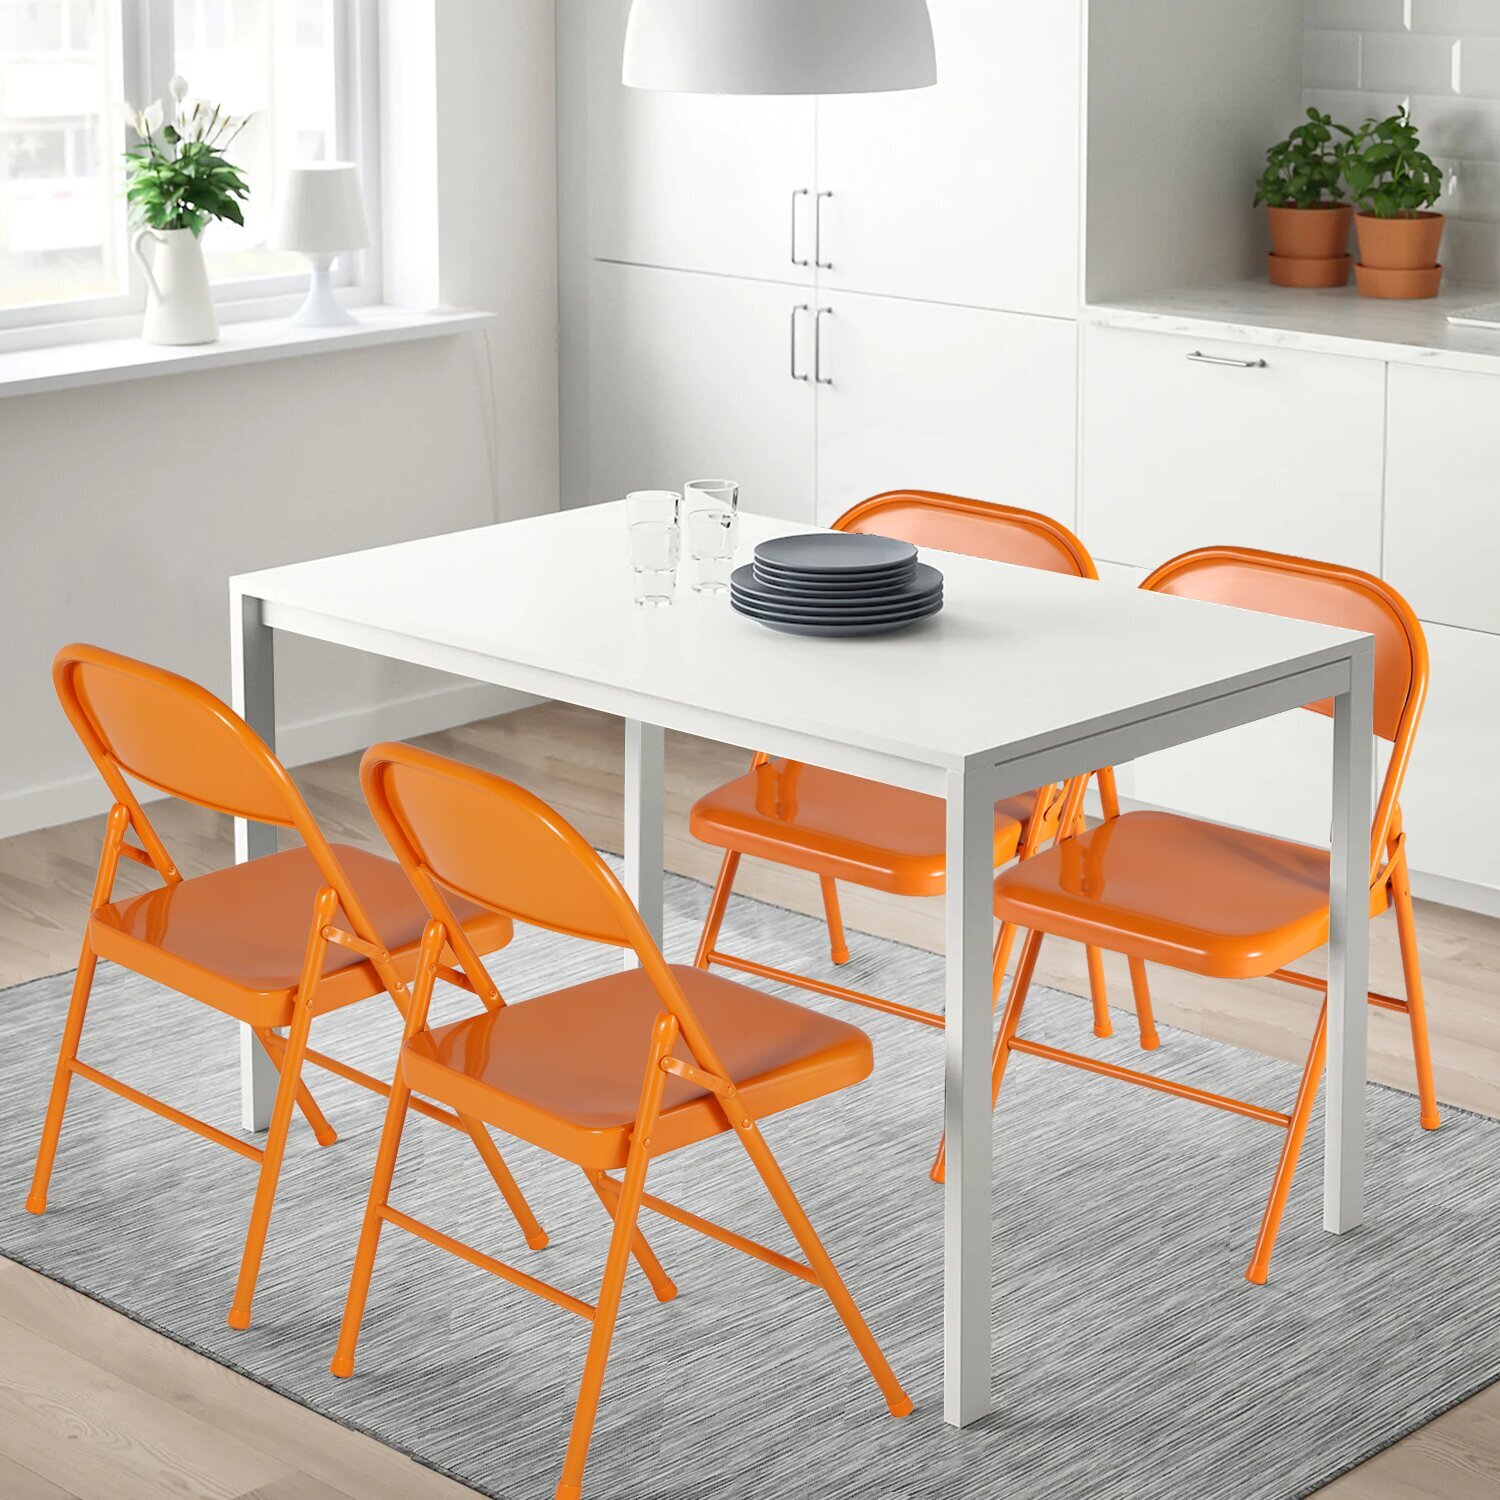 Colorful Contemporary Folding Chairs